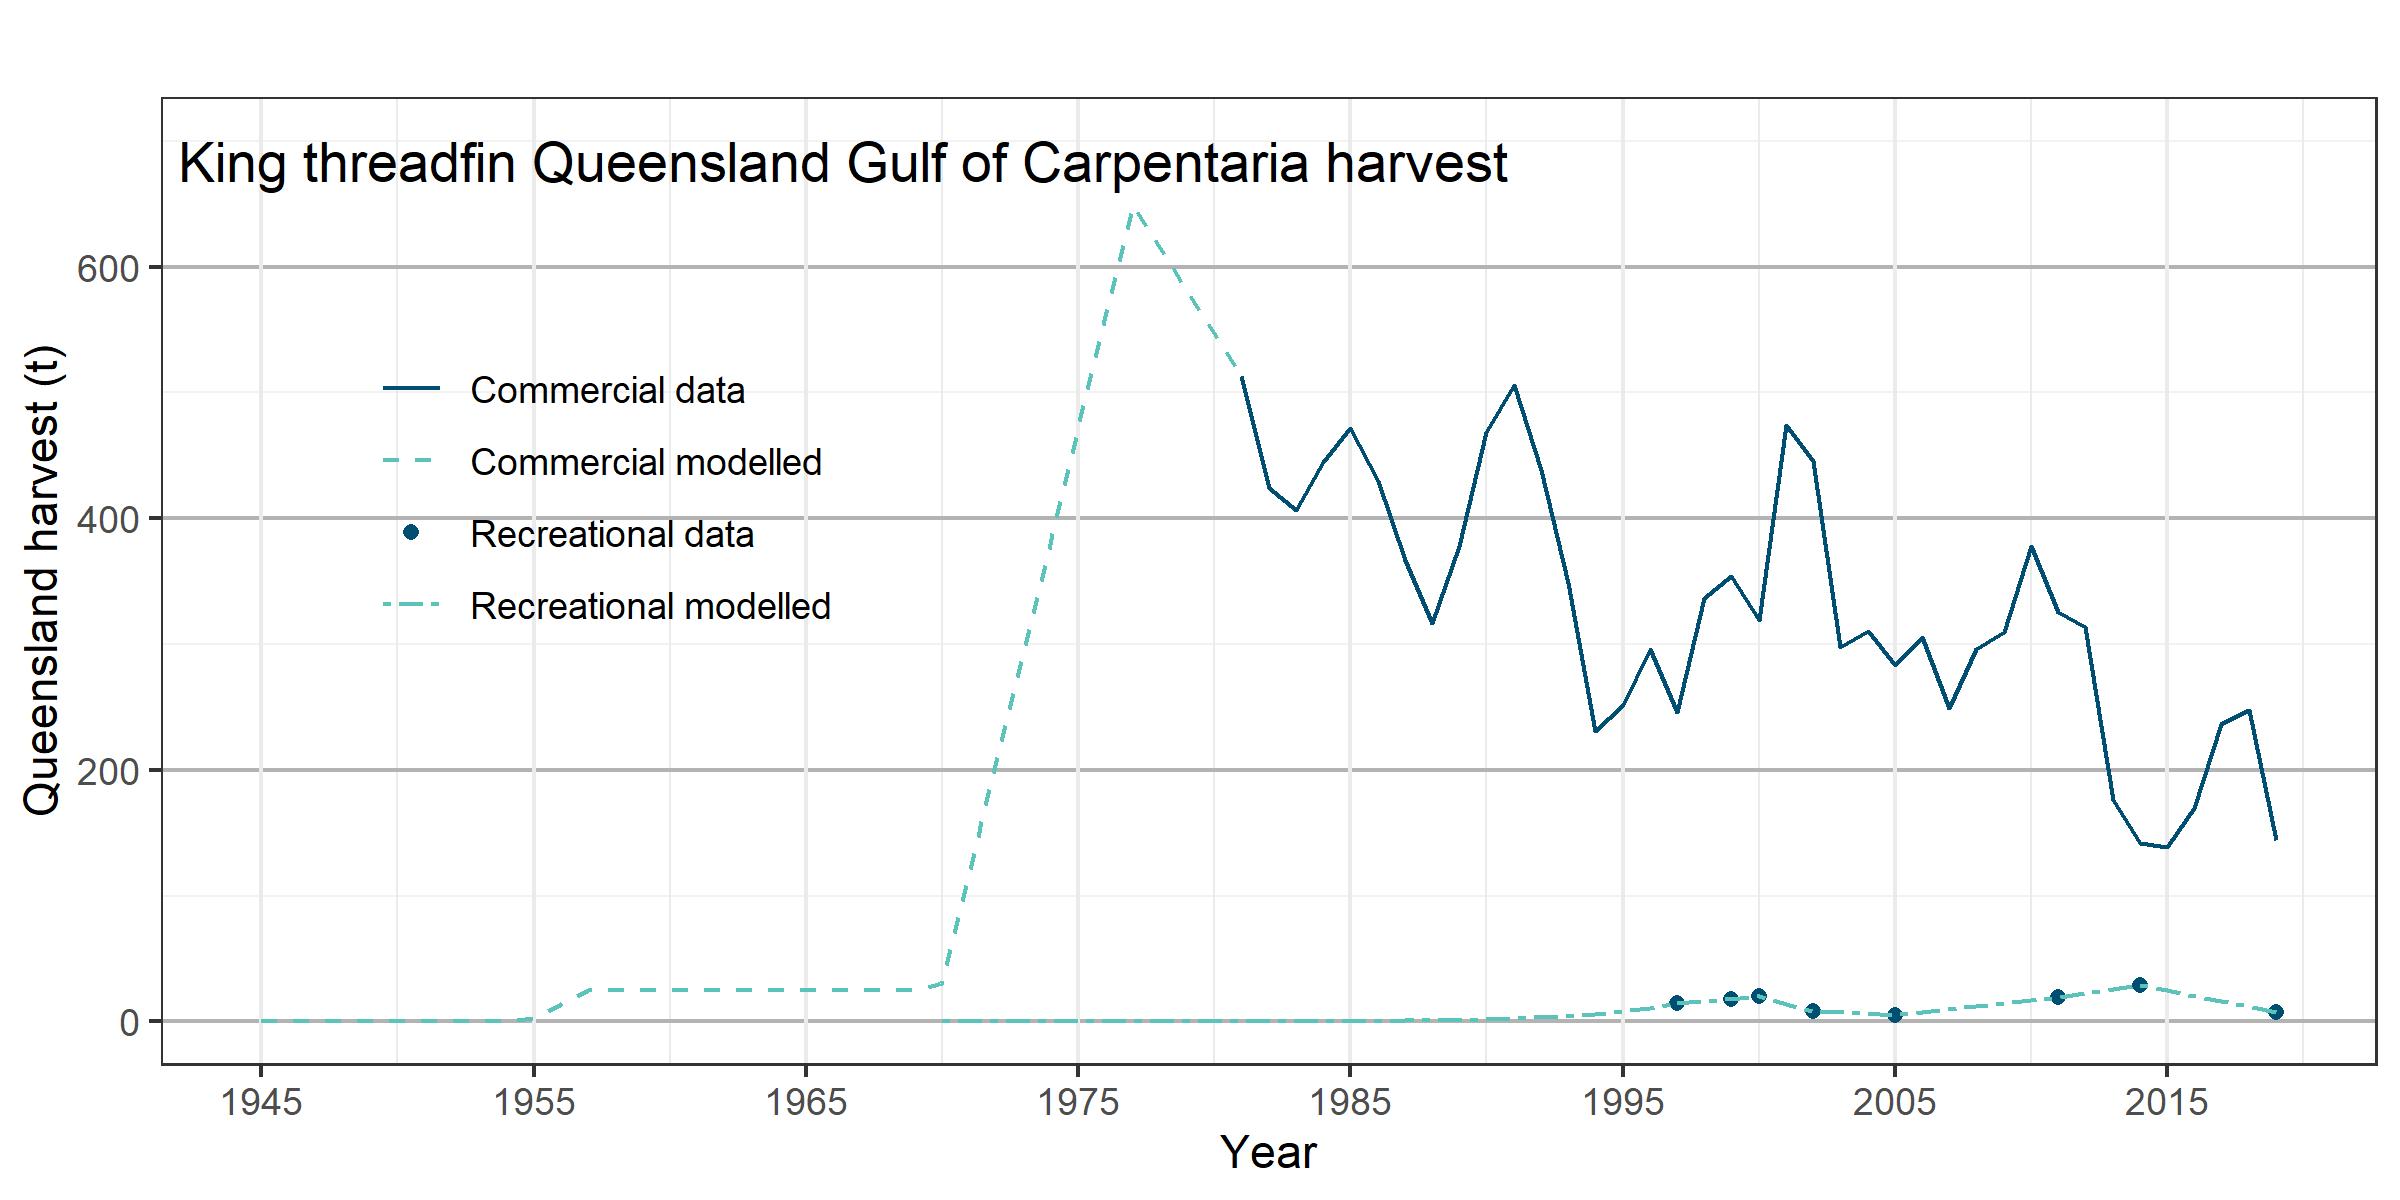 The chart presents the king threadfin harvest taken by commercial and recreational fishers in the Gulf of Carpentaria, Queensland from 1945 to 2019. The commercial harvest is modelled from 1945 to 1981. The recreational harvest is modelled from 1970 to 2019 apart from 1997, 1999, 2000, 2002, 2005, 2011, 2014 and 2019 where survey data is available.